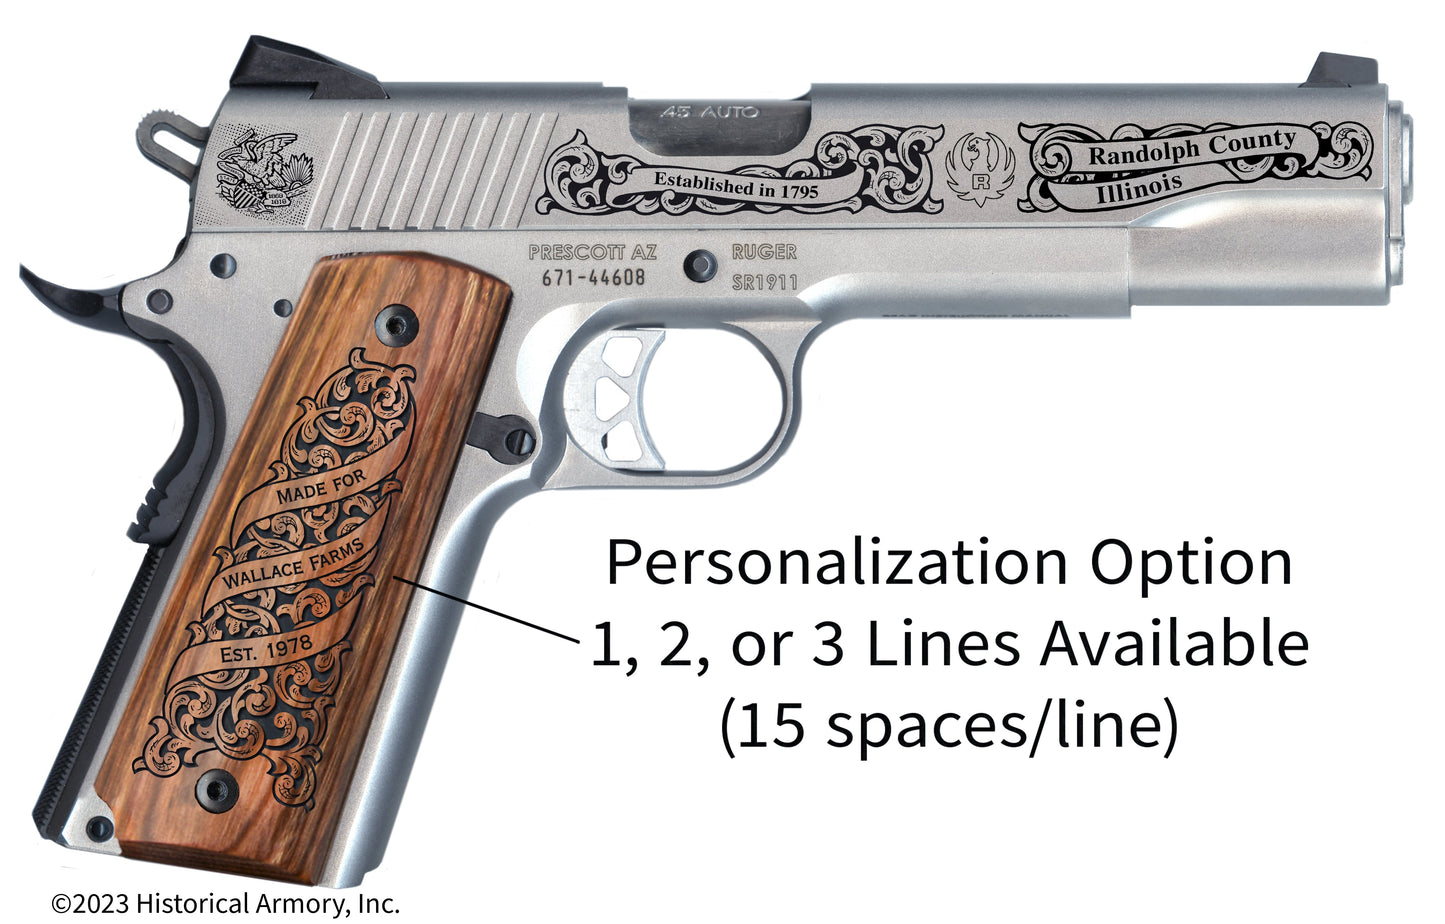 Randolph County Illinois Personalized Engraved .45 Auto Ruger 1911